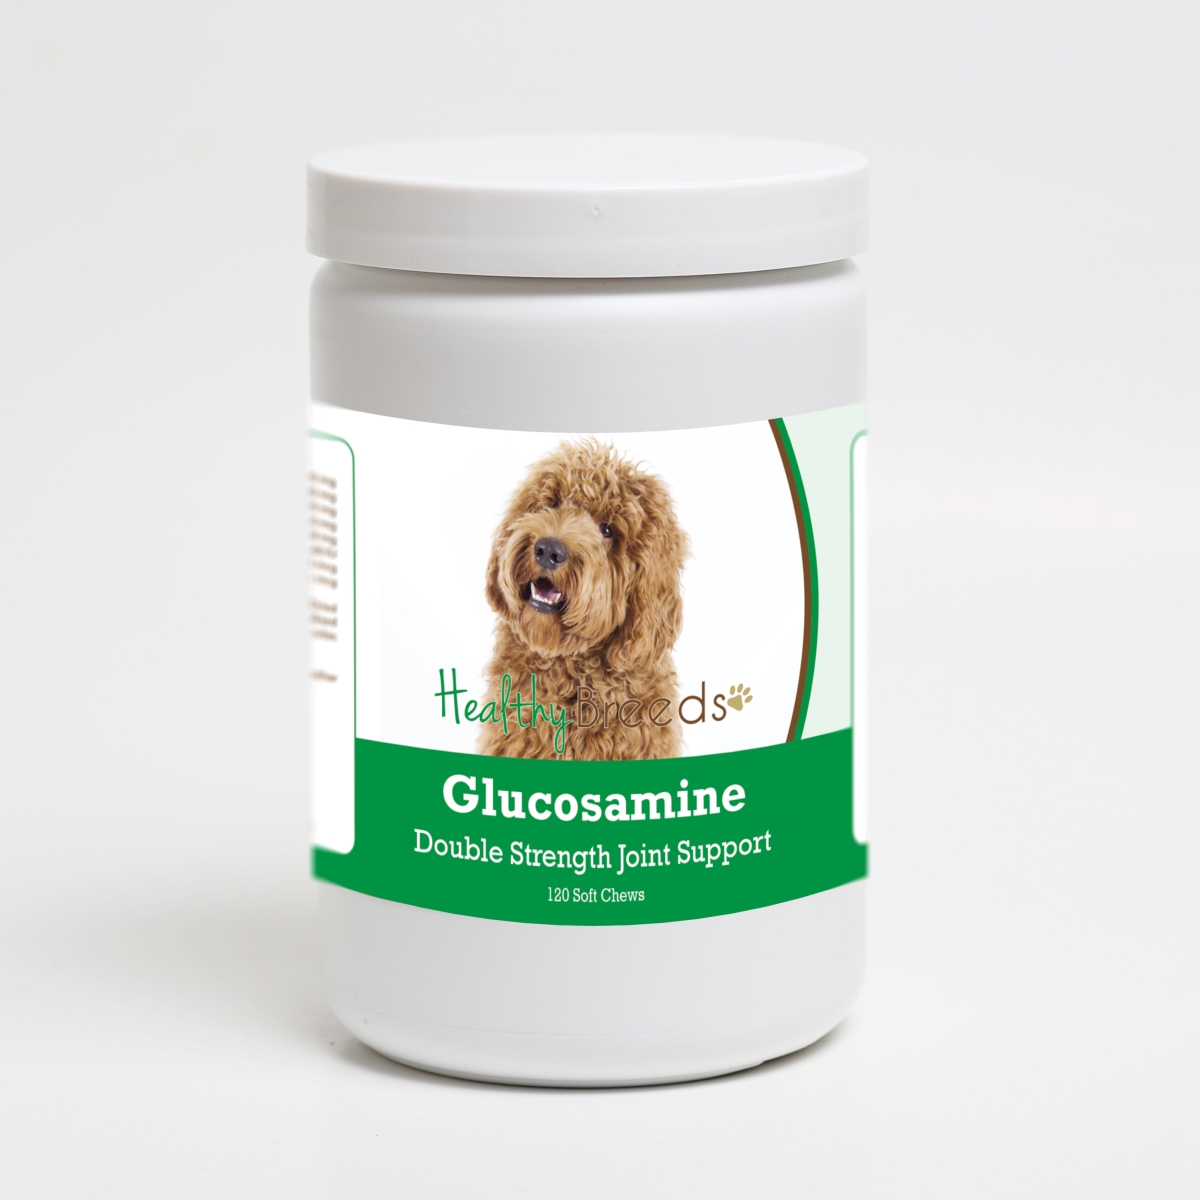 192959014990 Labradoodle Glucosamine Ds Plus Msm - 120 Count